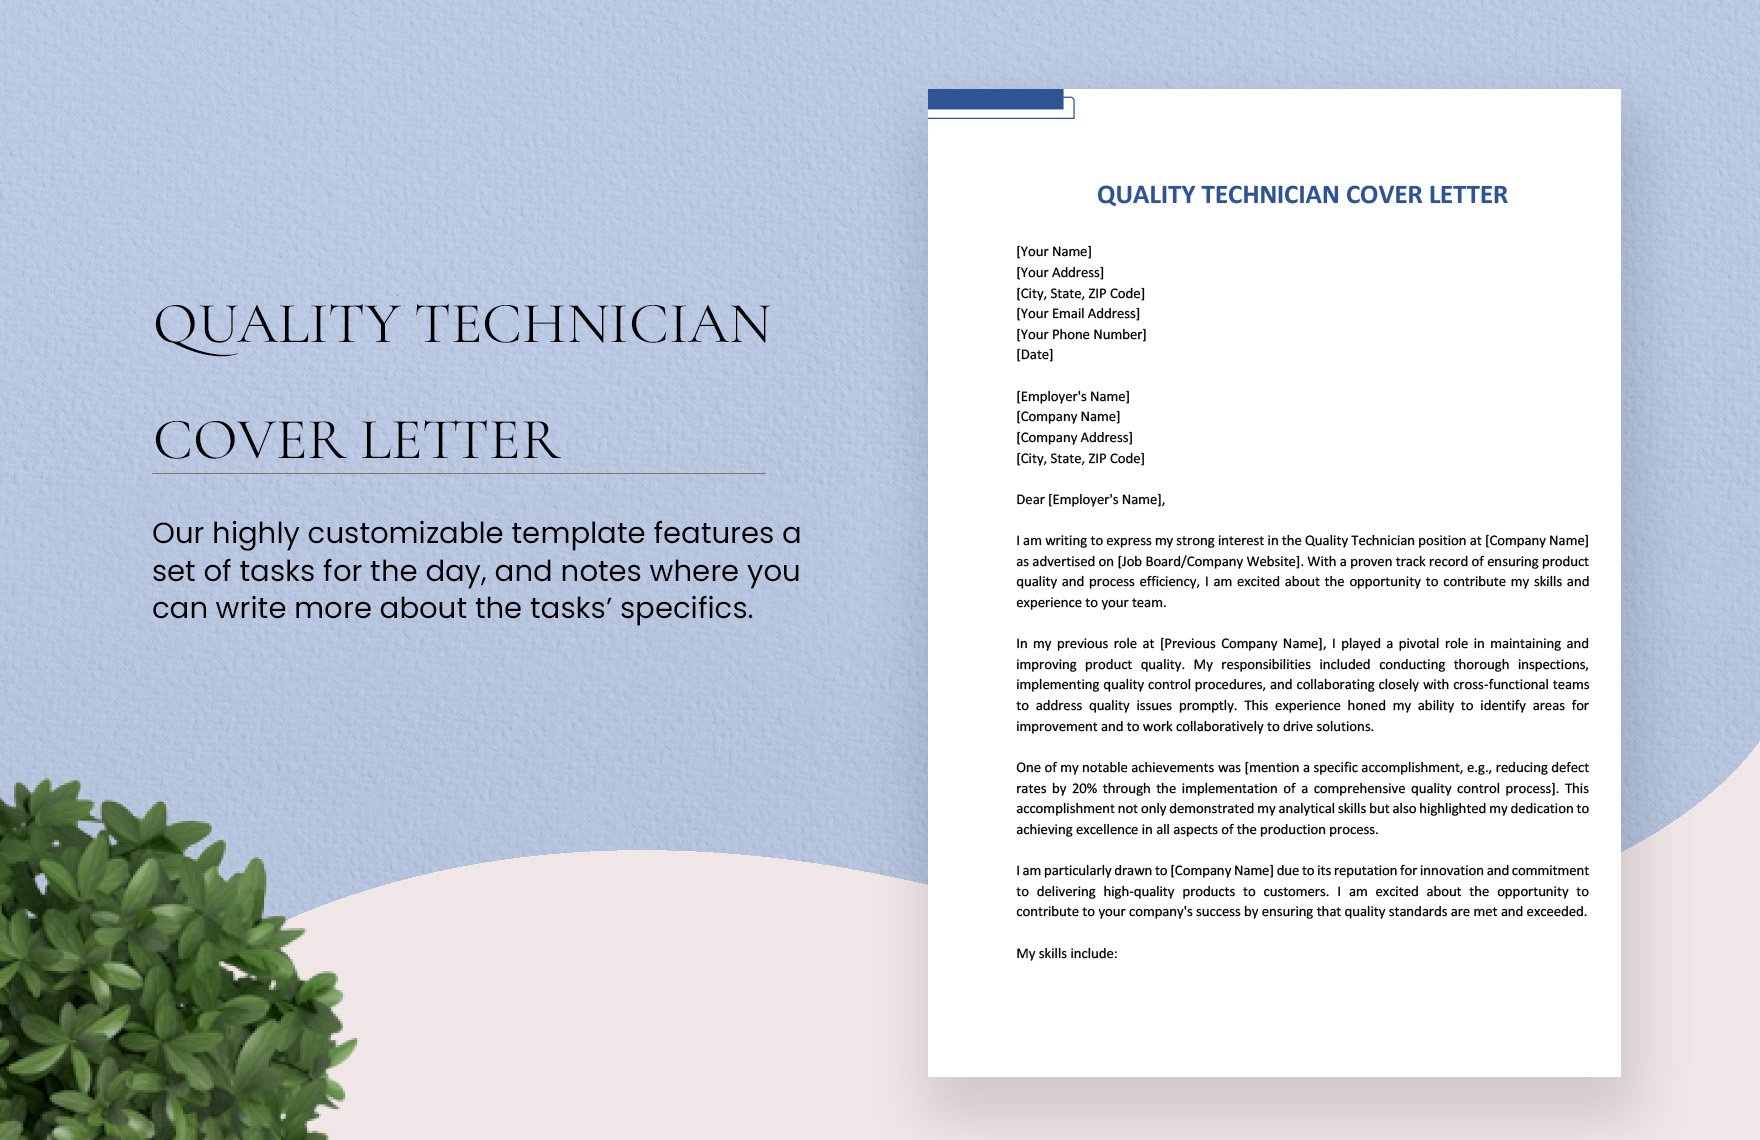 Quality Technician Cover Letter in Word, Google Docs, PDF